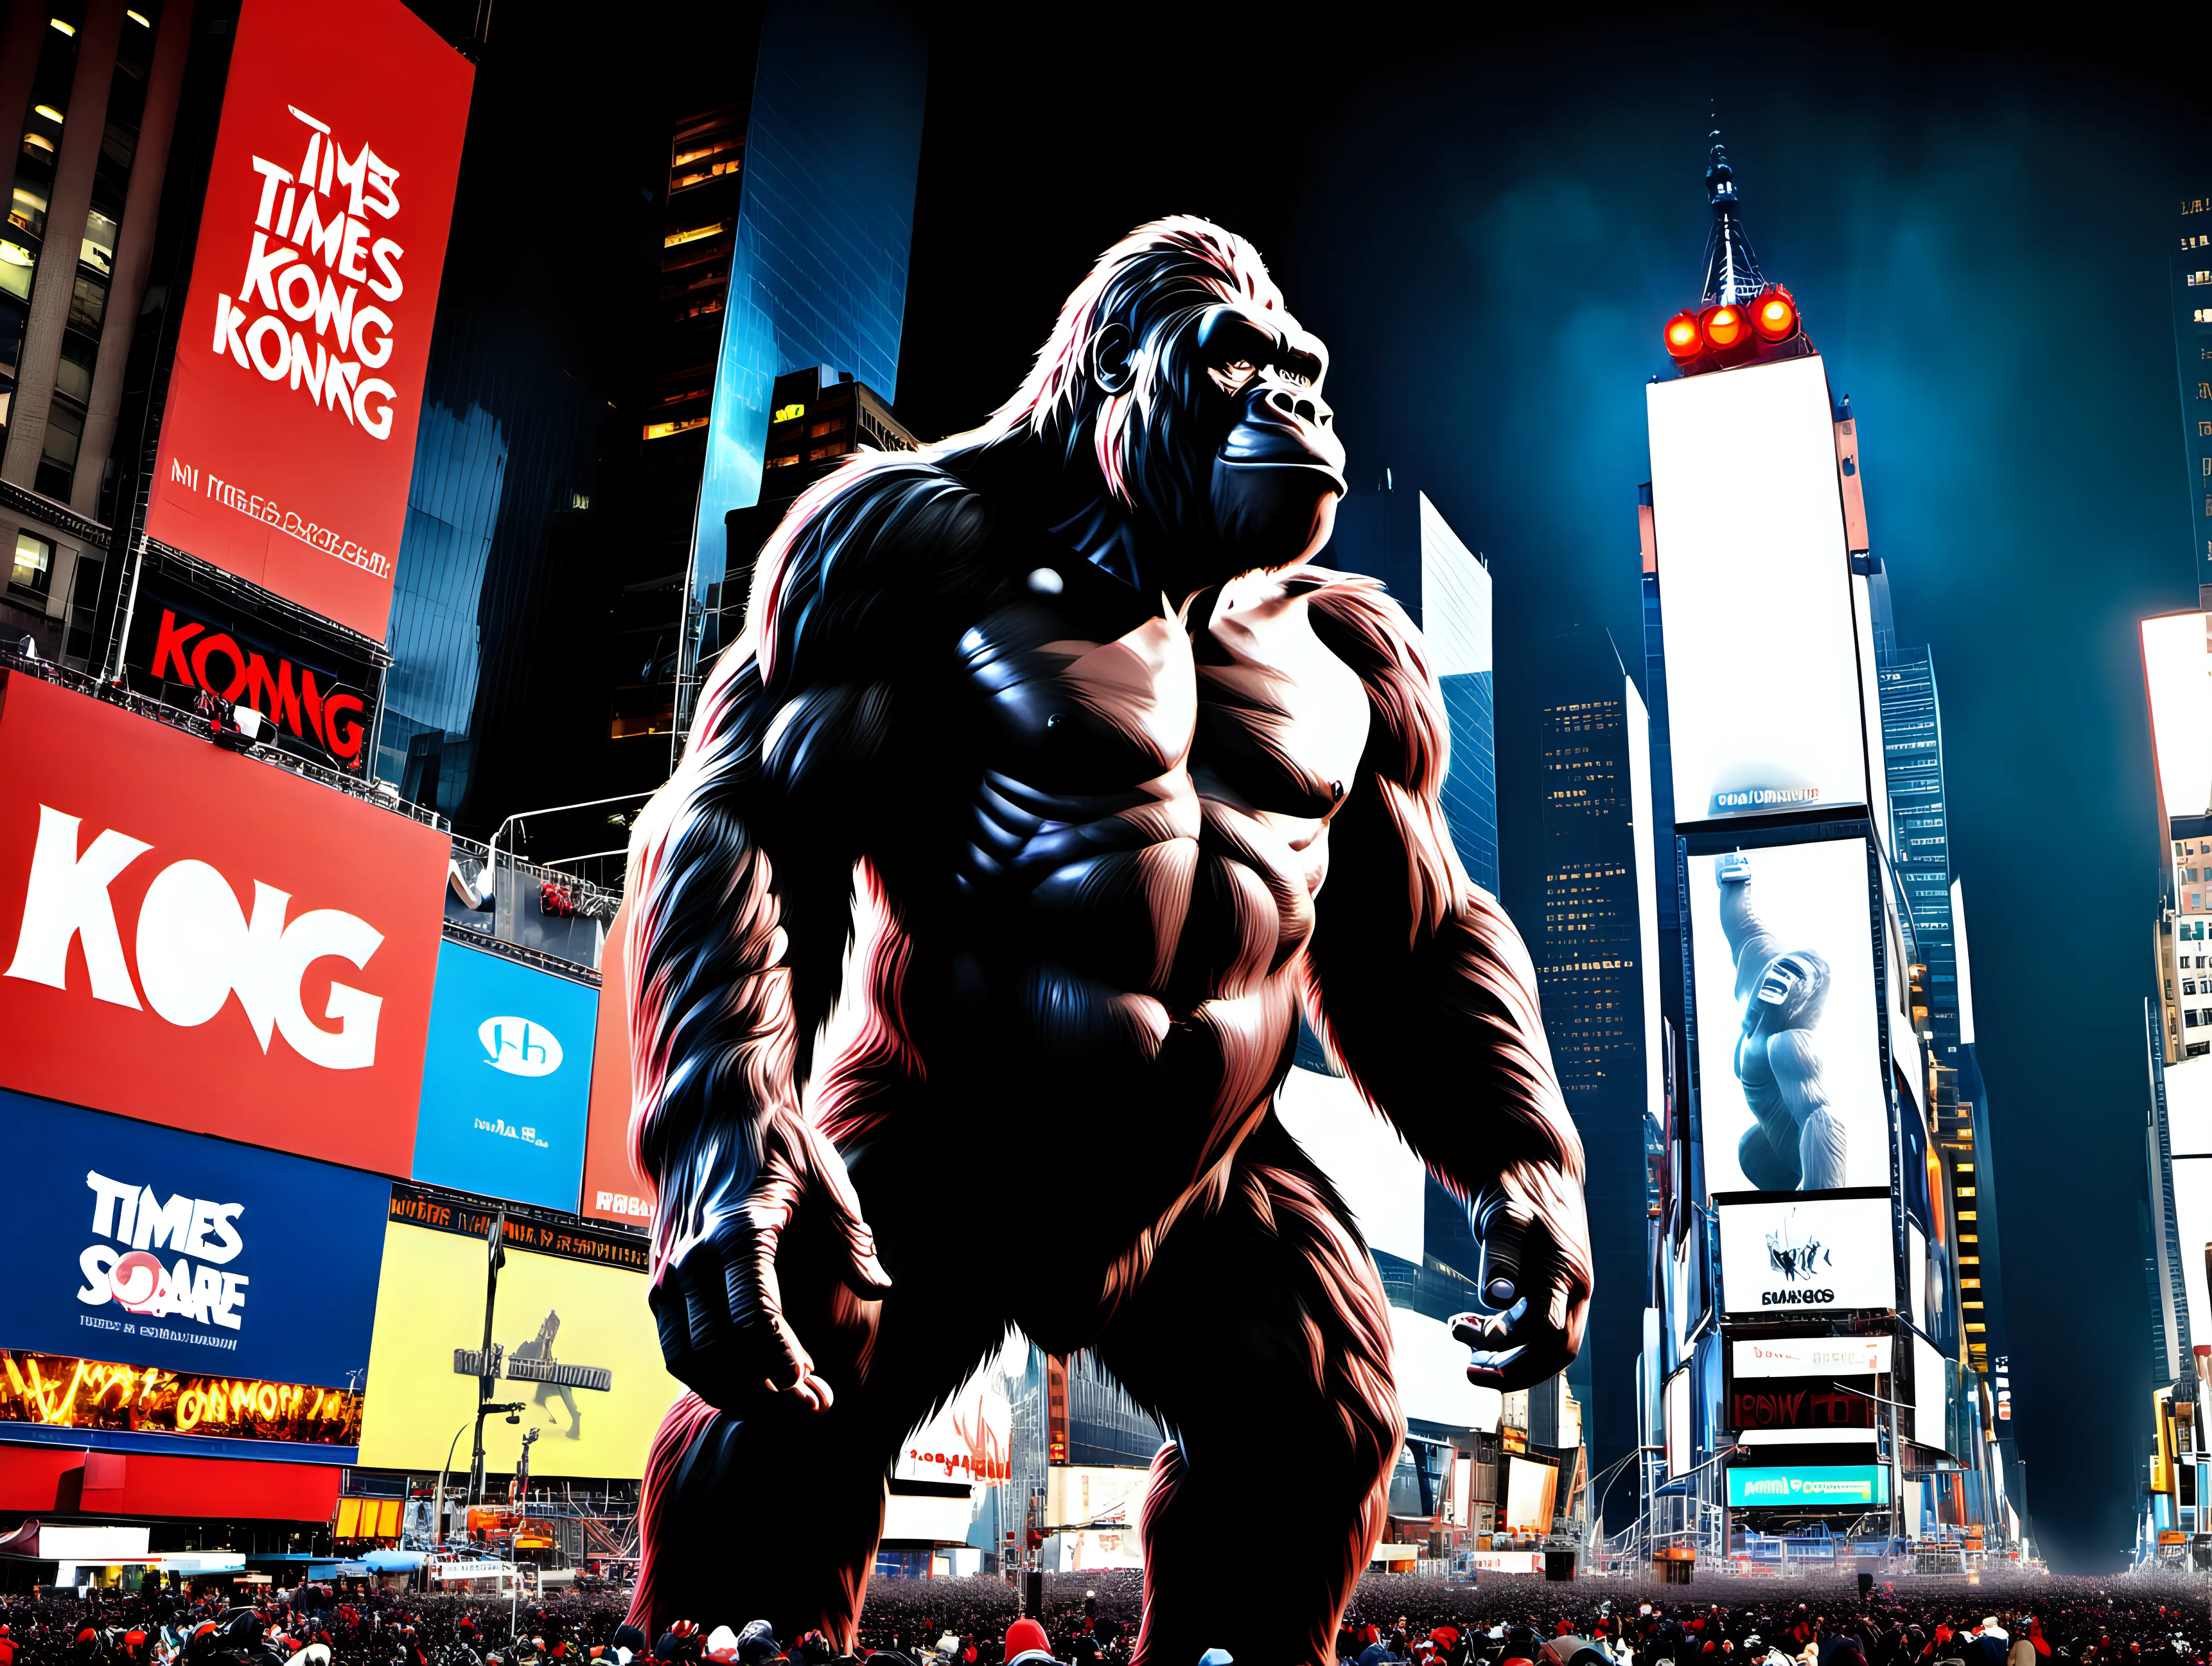 King Kong in Times square NYE